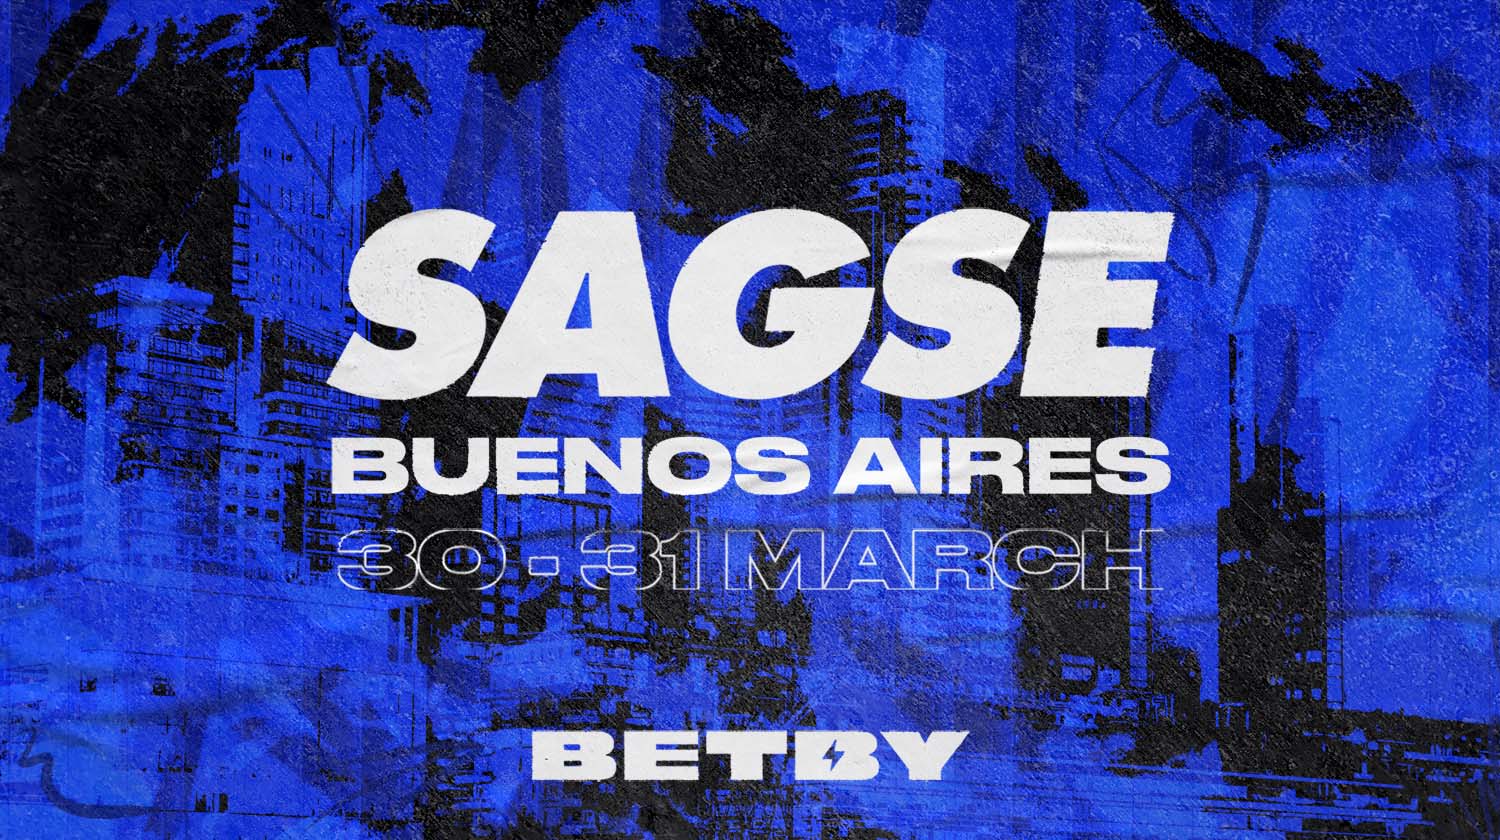 Attending SAGSE Buenos Aires